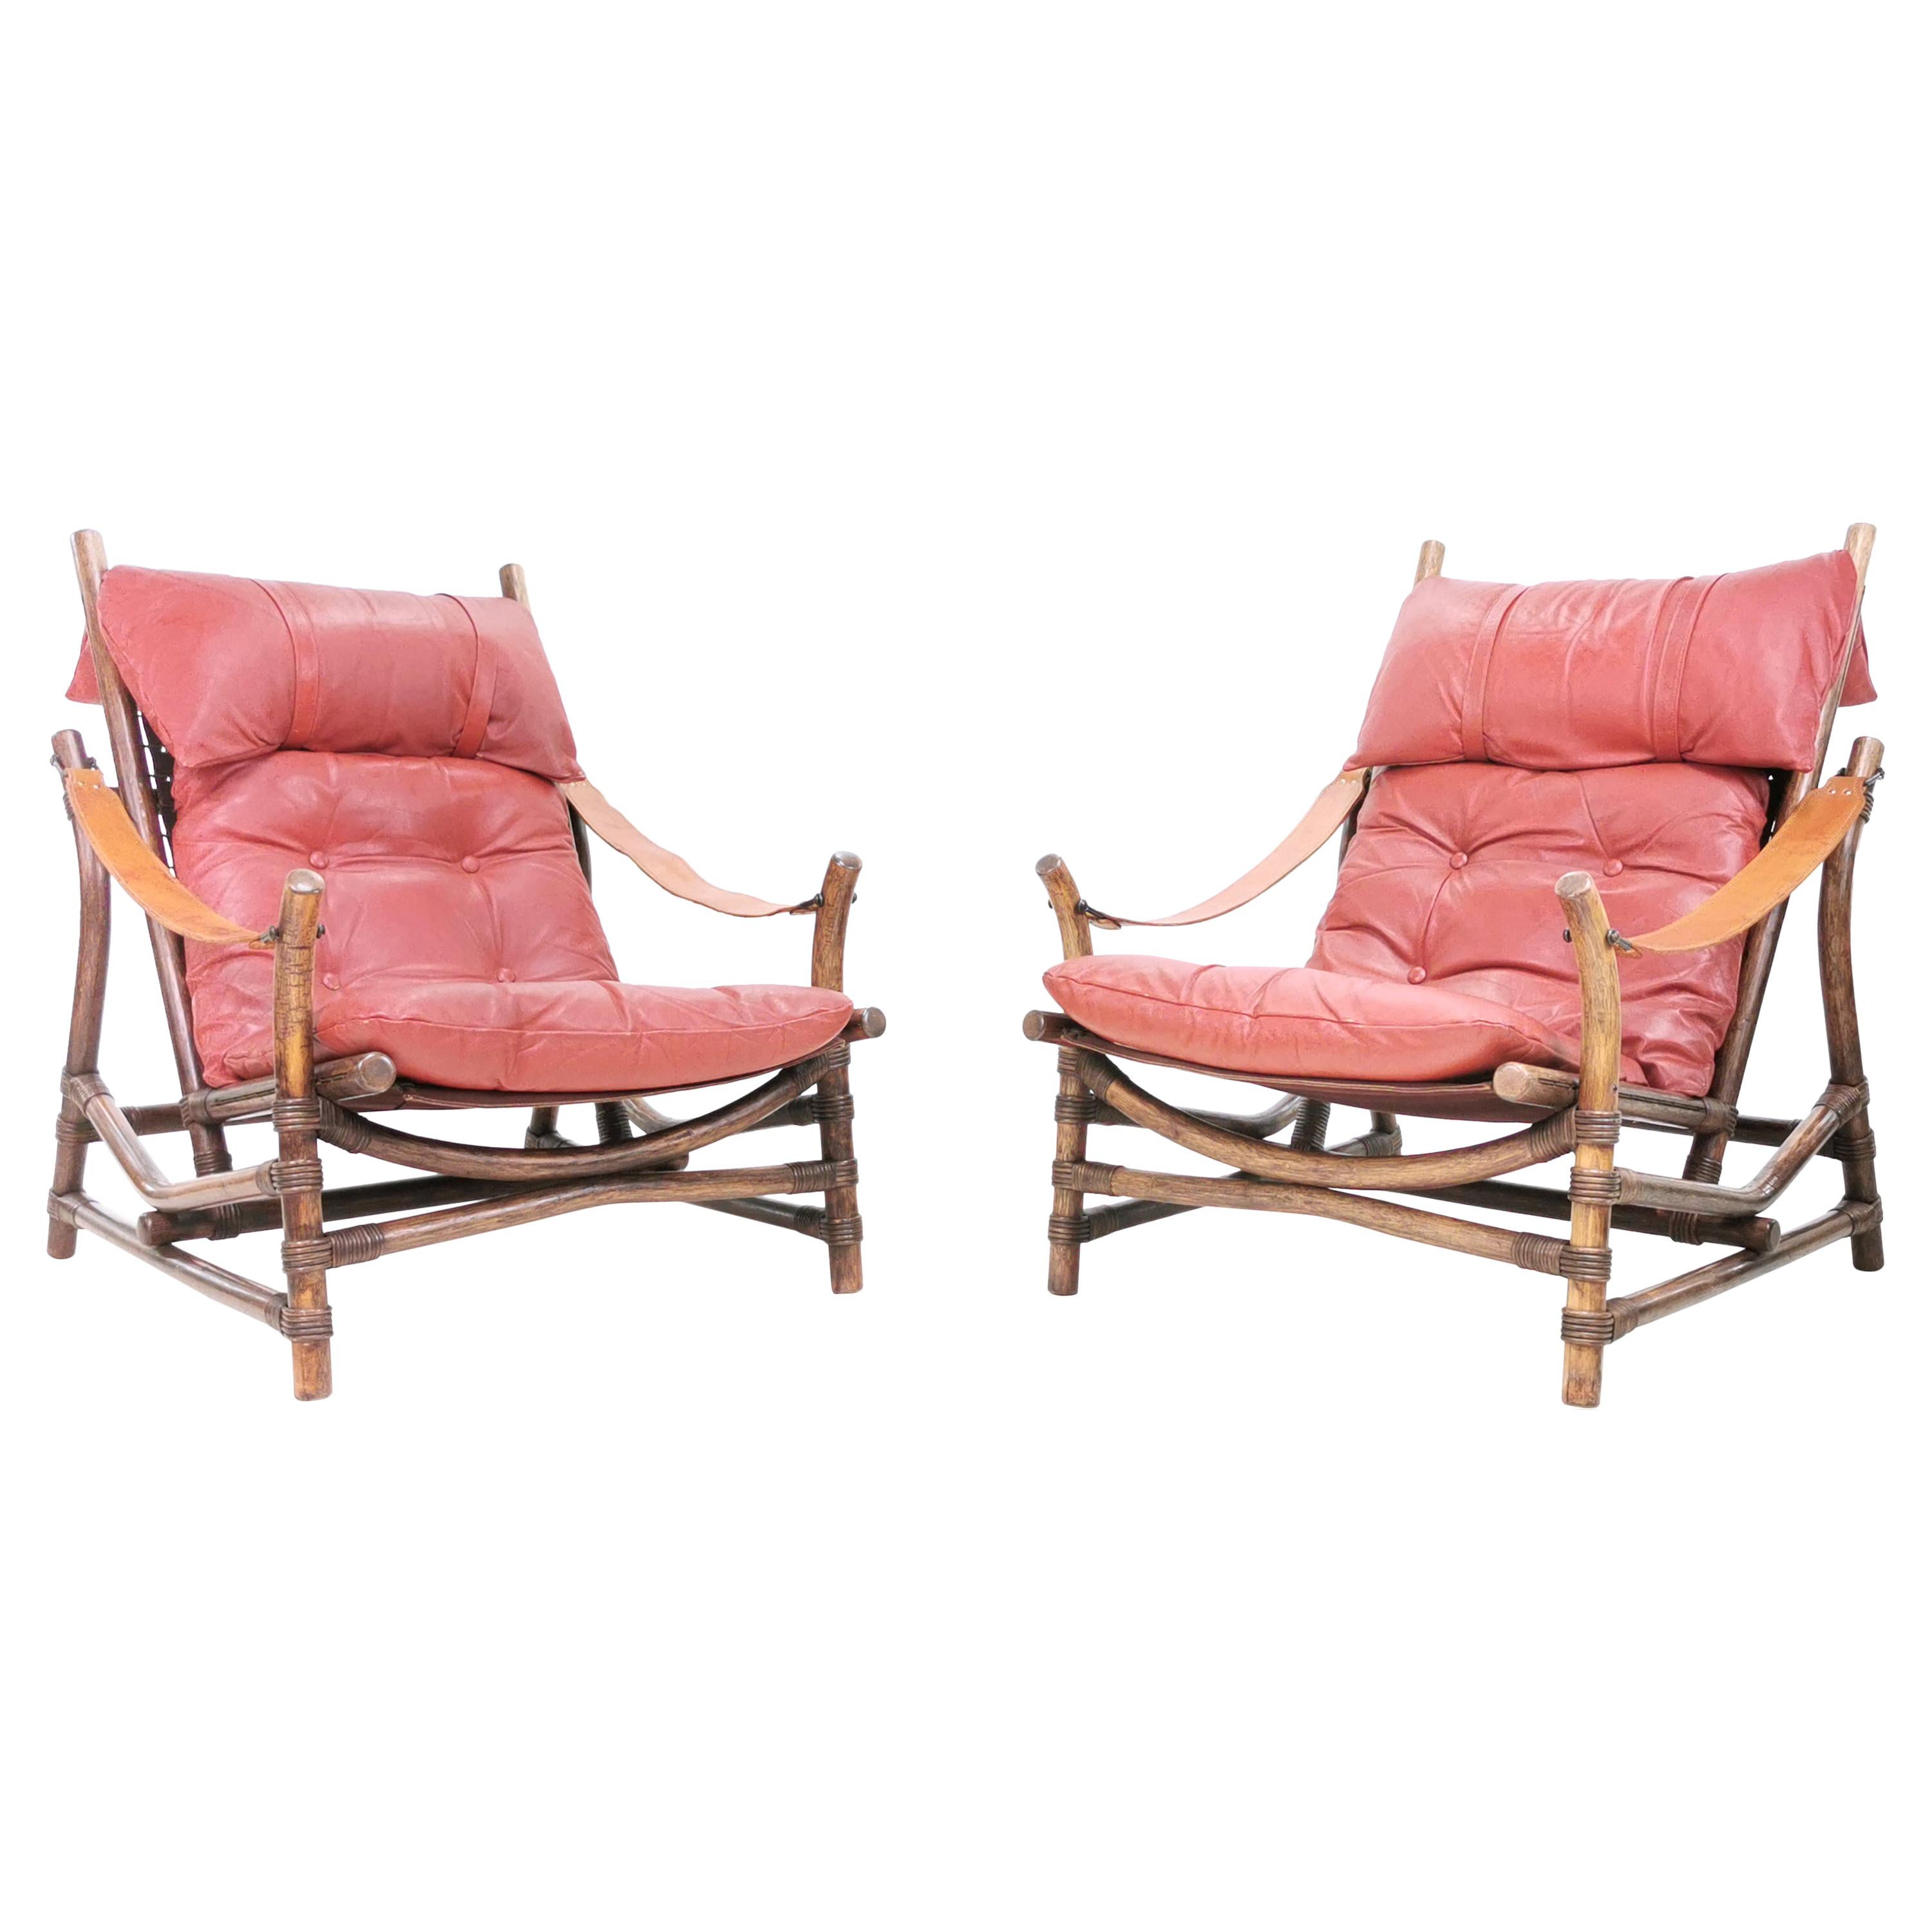 Pair of Mid Century Bamboo & Leather Lounge Chairs